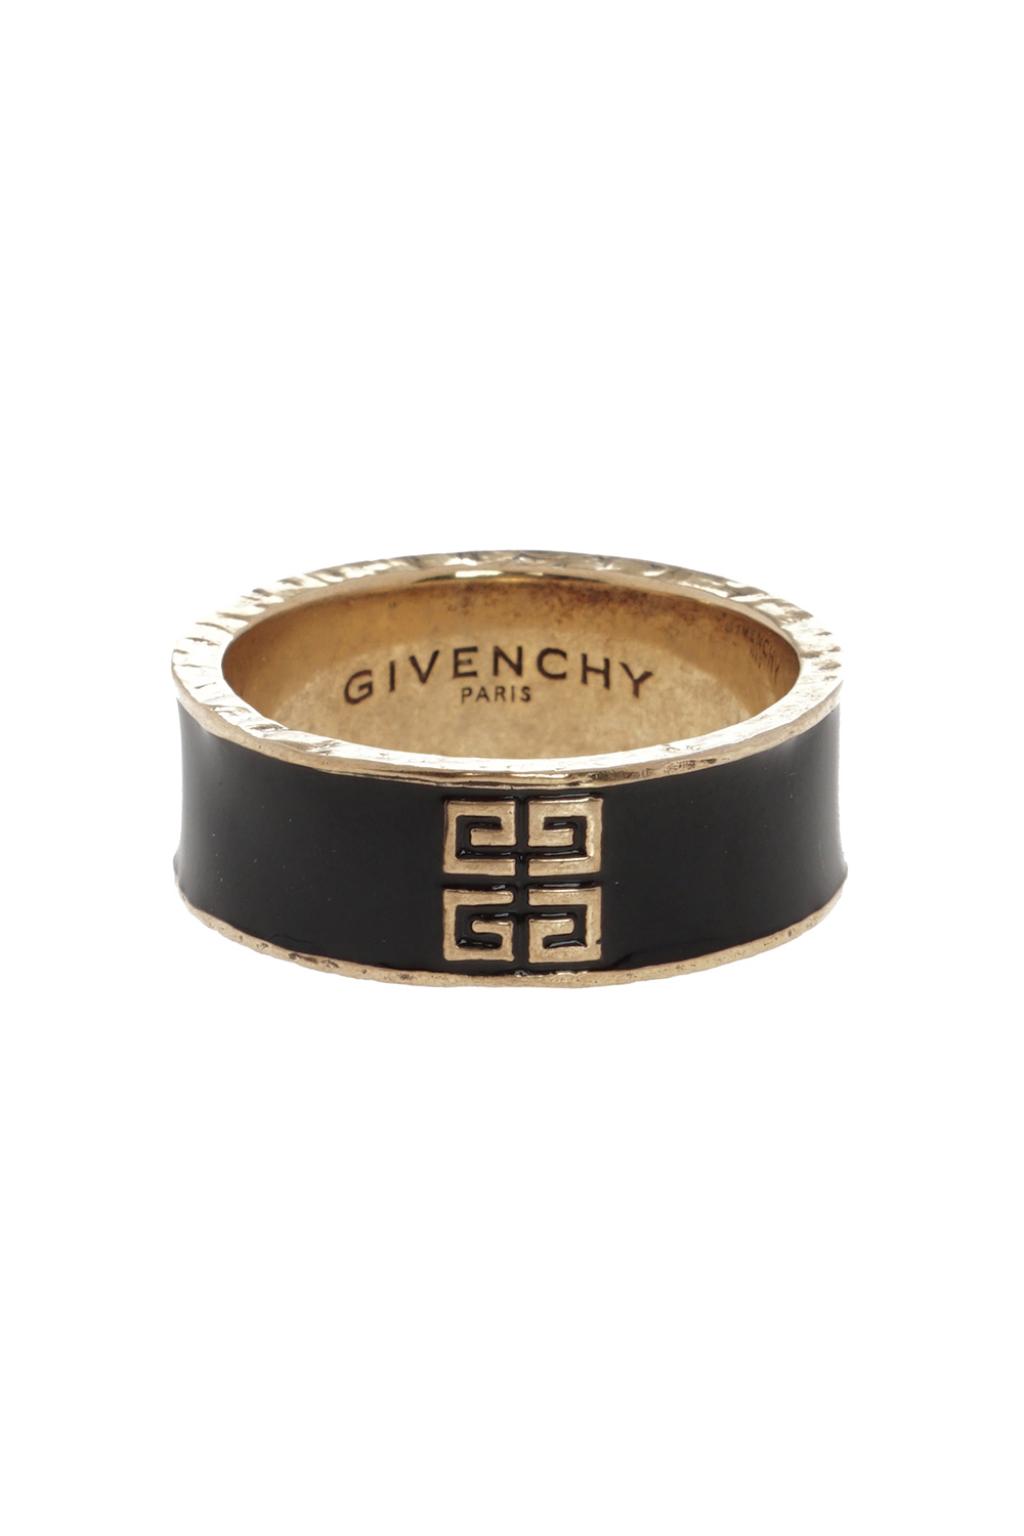 givency ring